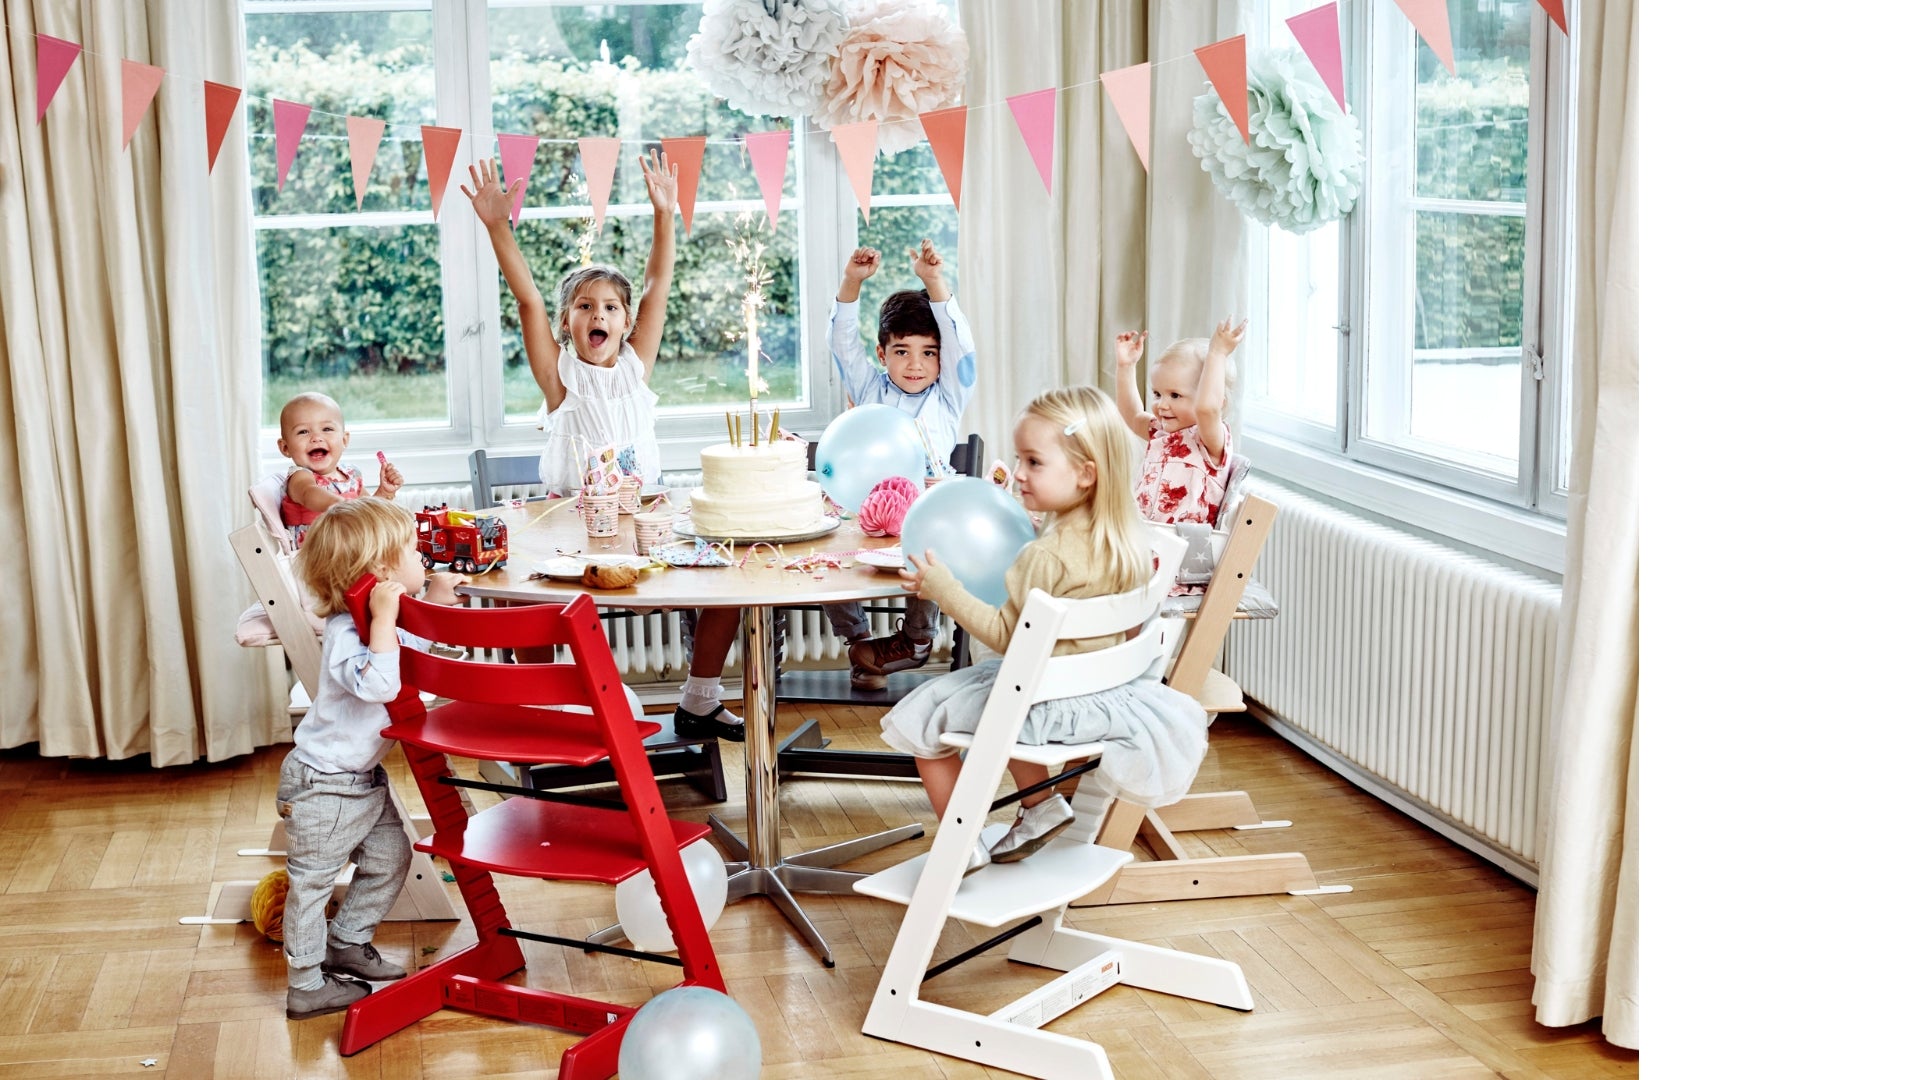 Stokke Tripp Trapps all around a birthday party table